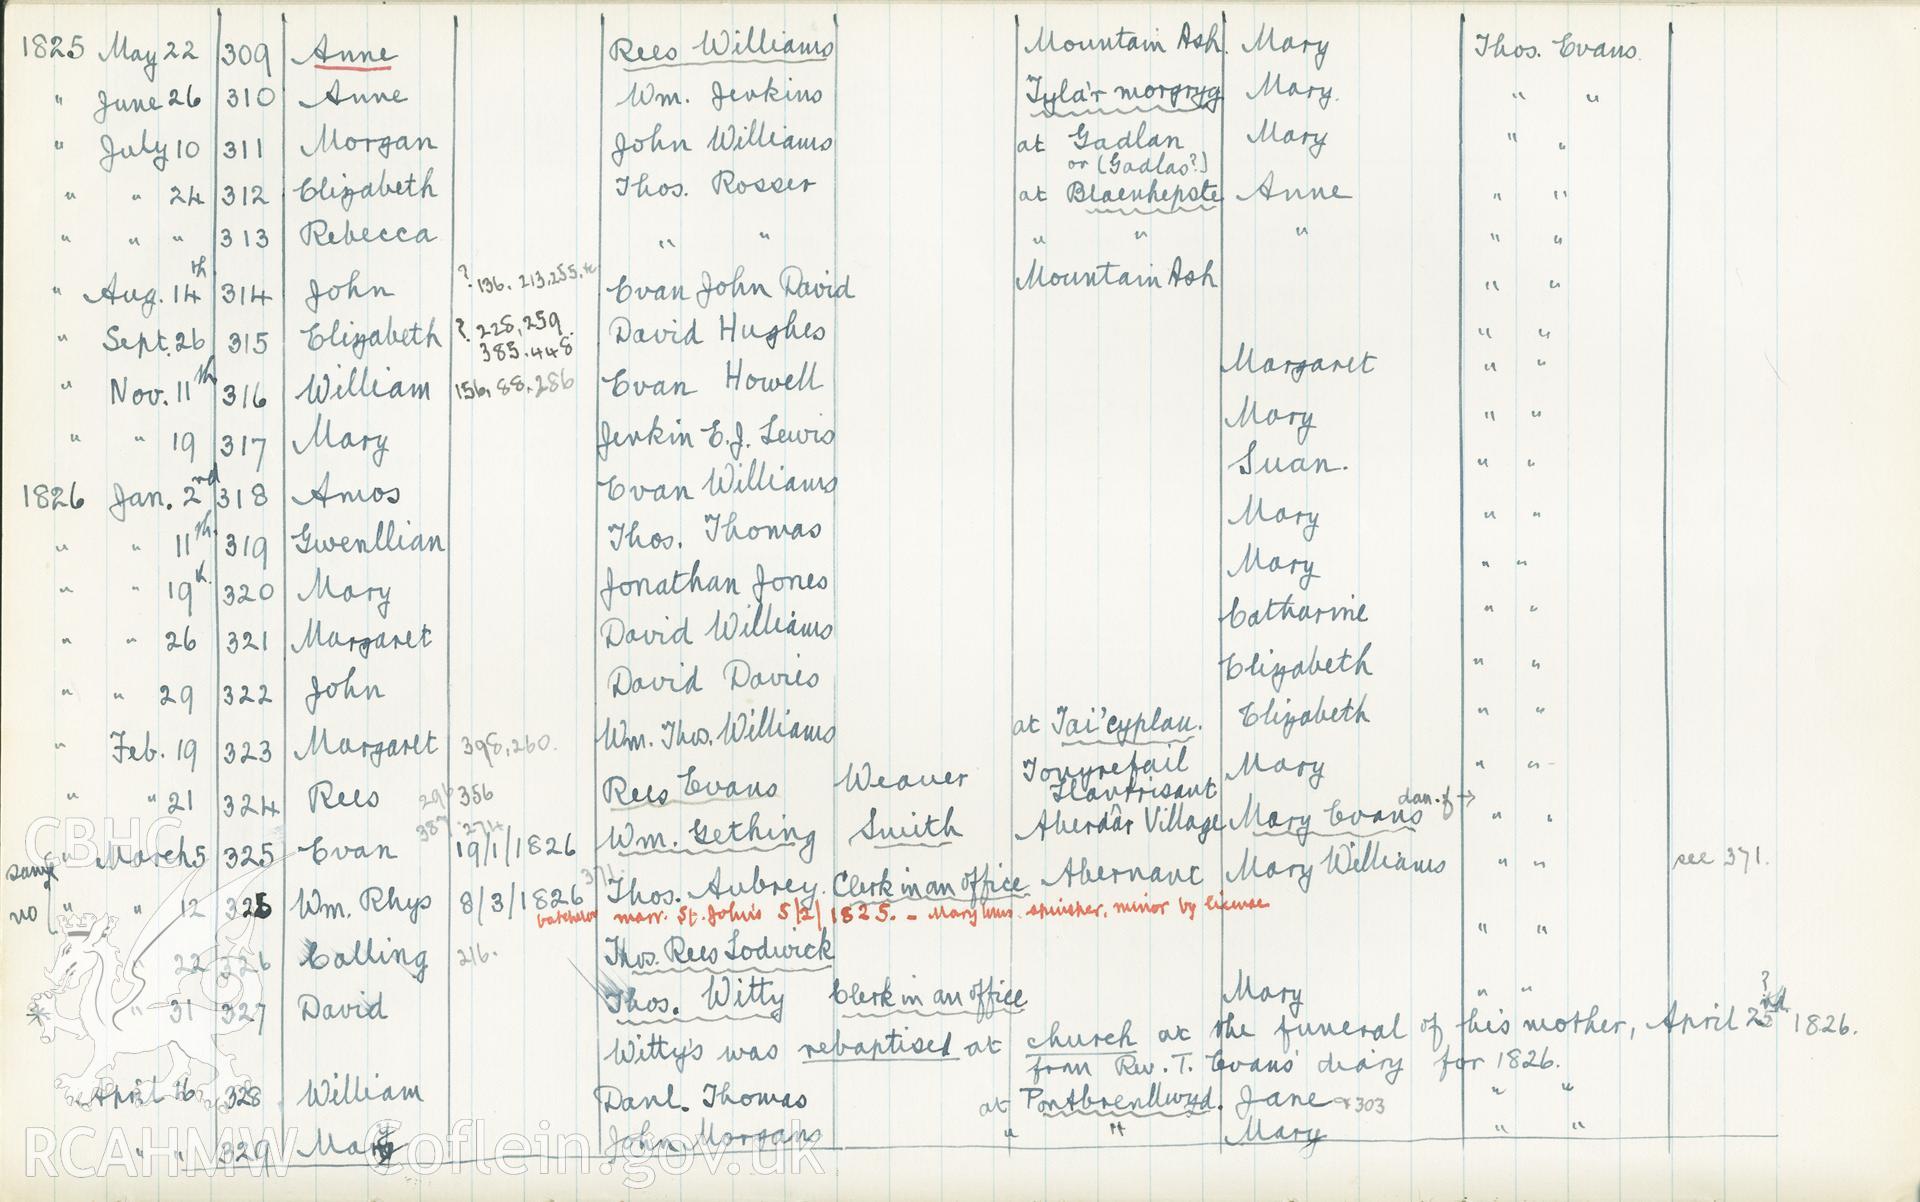 "Baptism Registered" book for Hen Dy Cwrdd, made between April 19th and 28th, 1941, by W. W. Price. Page listing baptisms from 22nd May 1825 to 16th April 1826. Donated to the RCAHMW as part of the Digital Dissent Project.